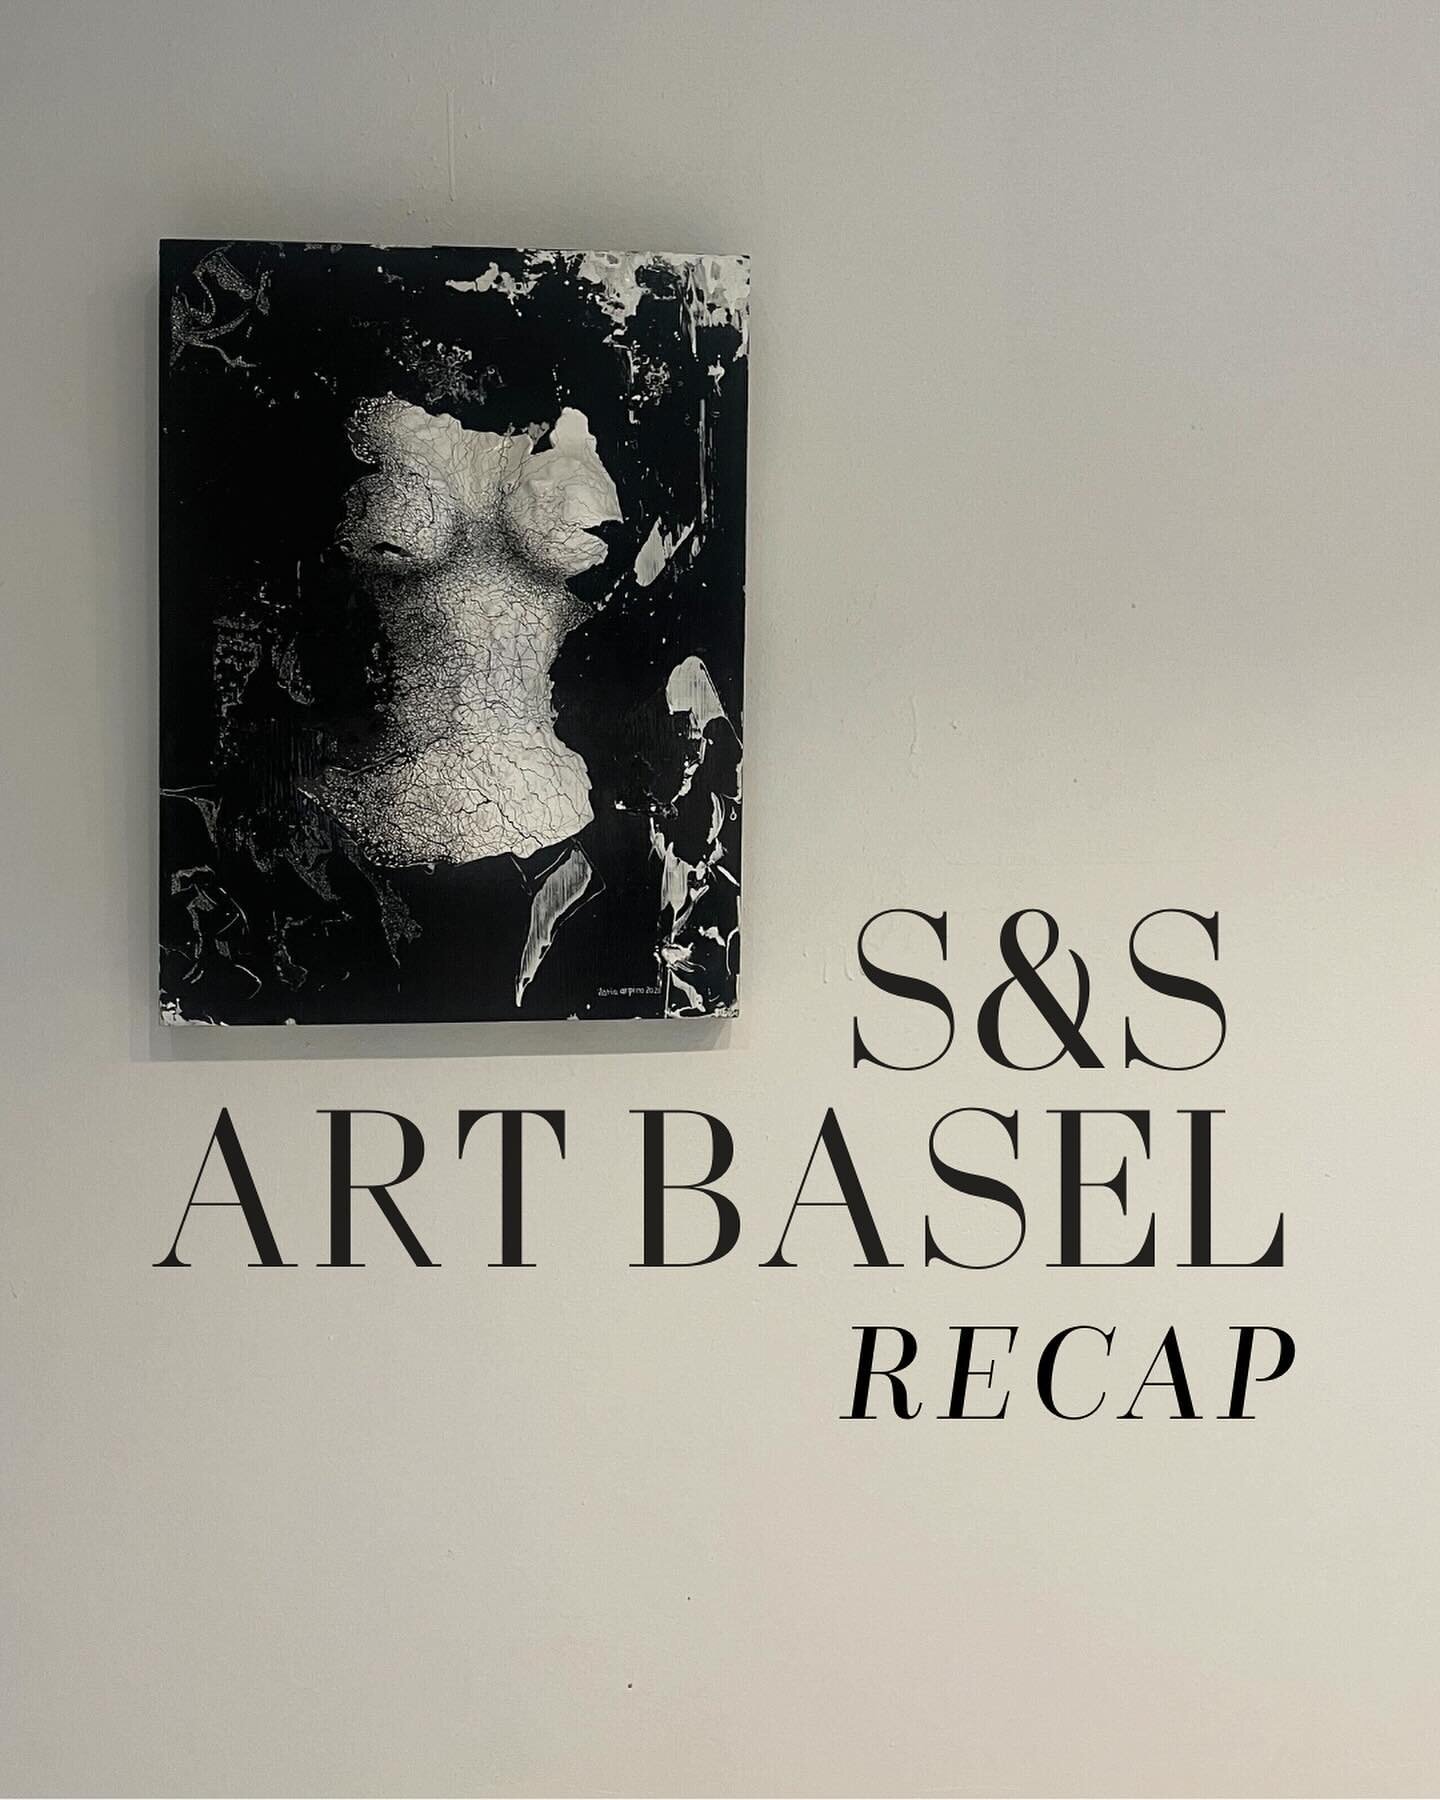 We had a blast attending and capturing the vibrant tapestry of creativity at Art Basel. It was a kaleidoscope of avant-garde expressions, eclectic masterpieces, and the pulsating energy of the global art scene. Every day, we&rsquo;re more proud to su